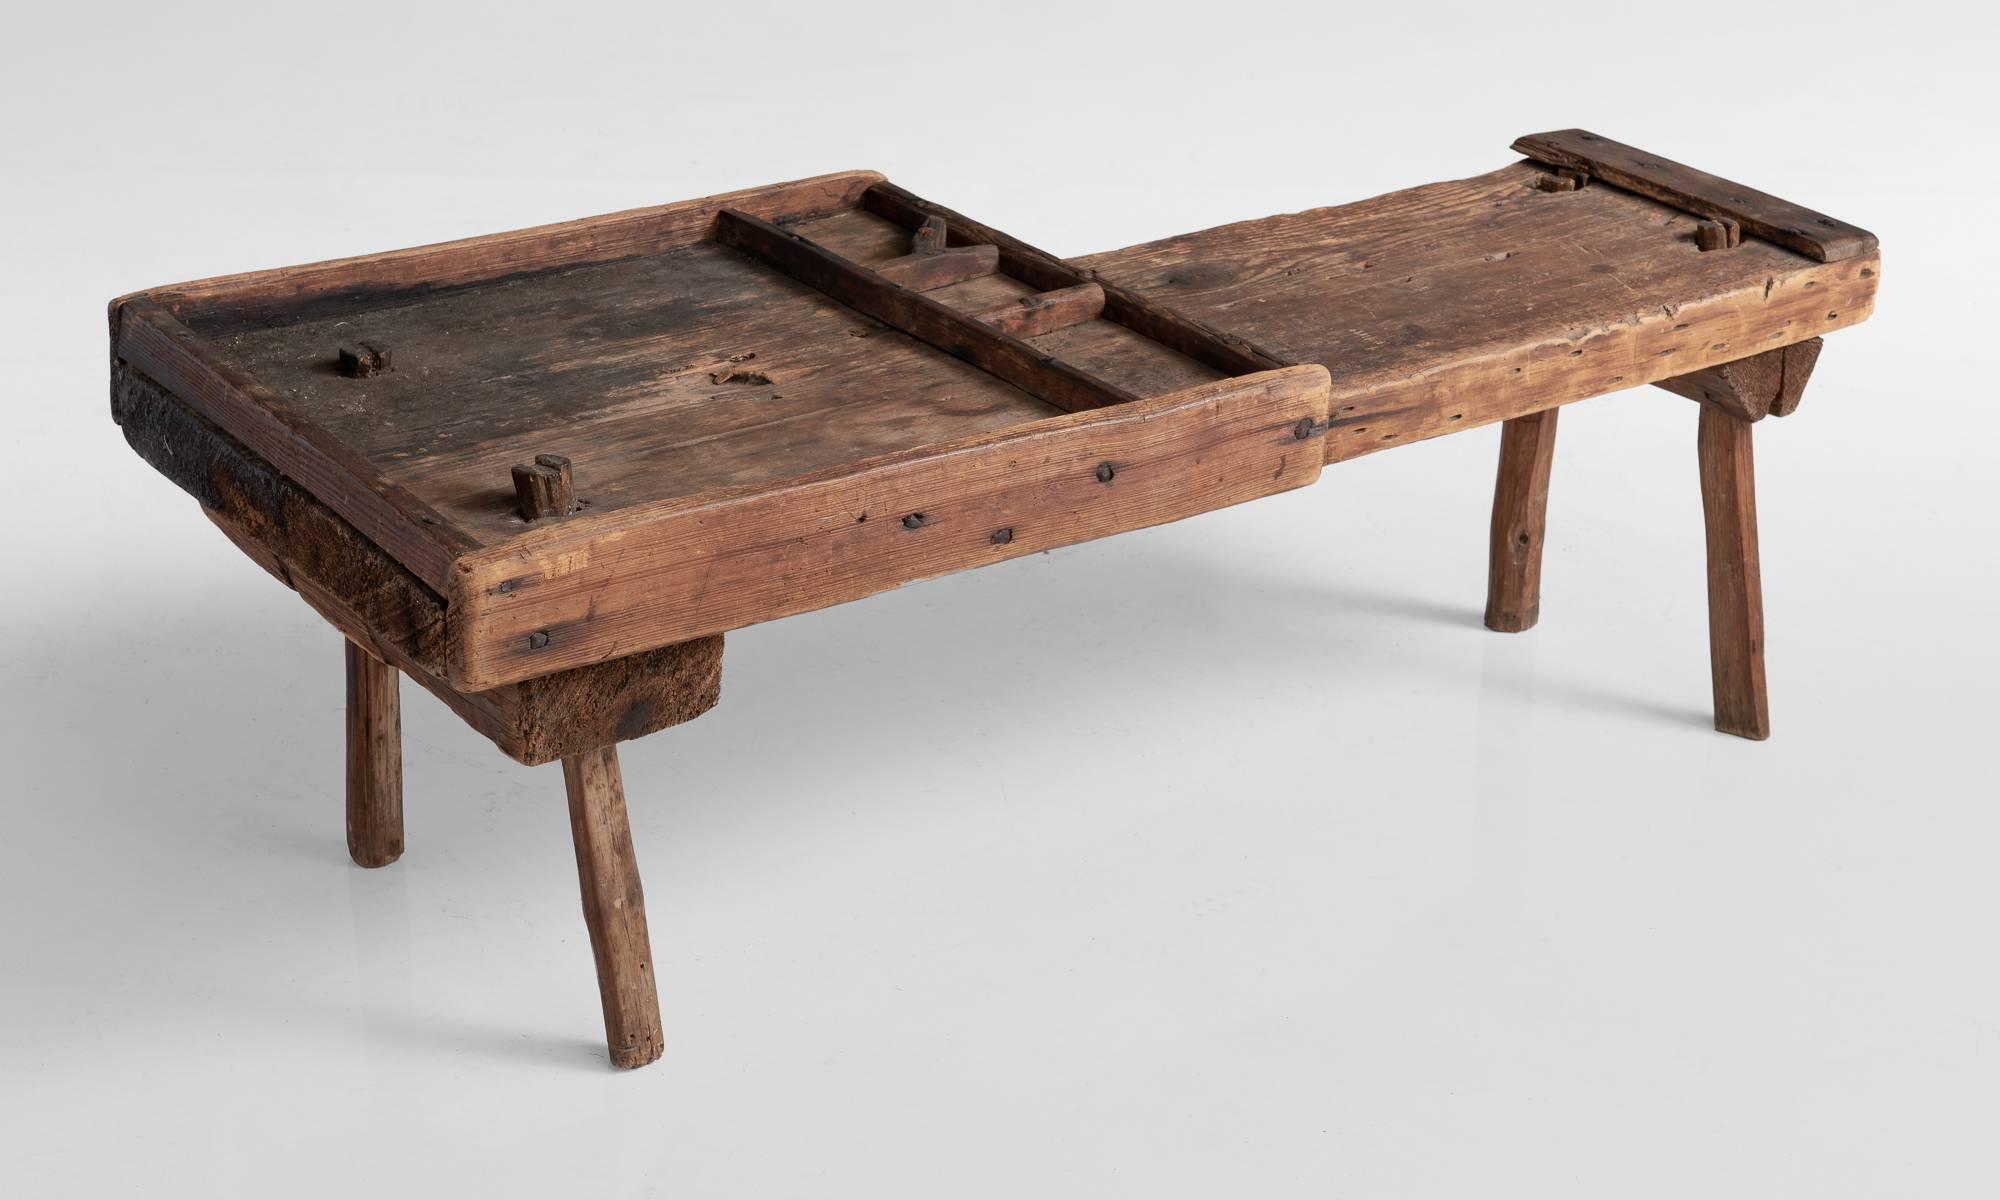 Primitive Cobbler's bench, England, circa 1790.

Well worn pine bench constructed by hand. Unique form.